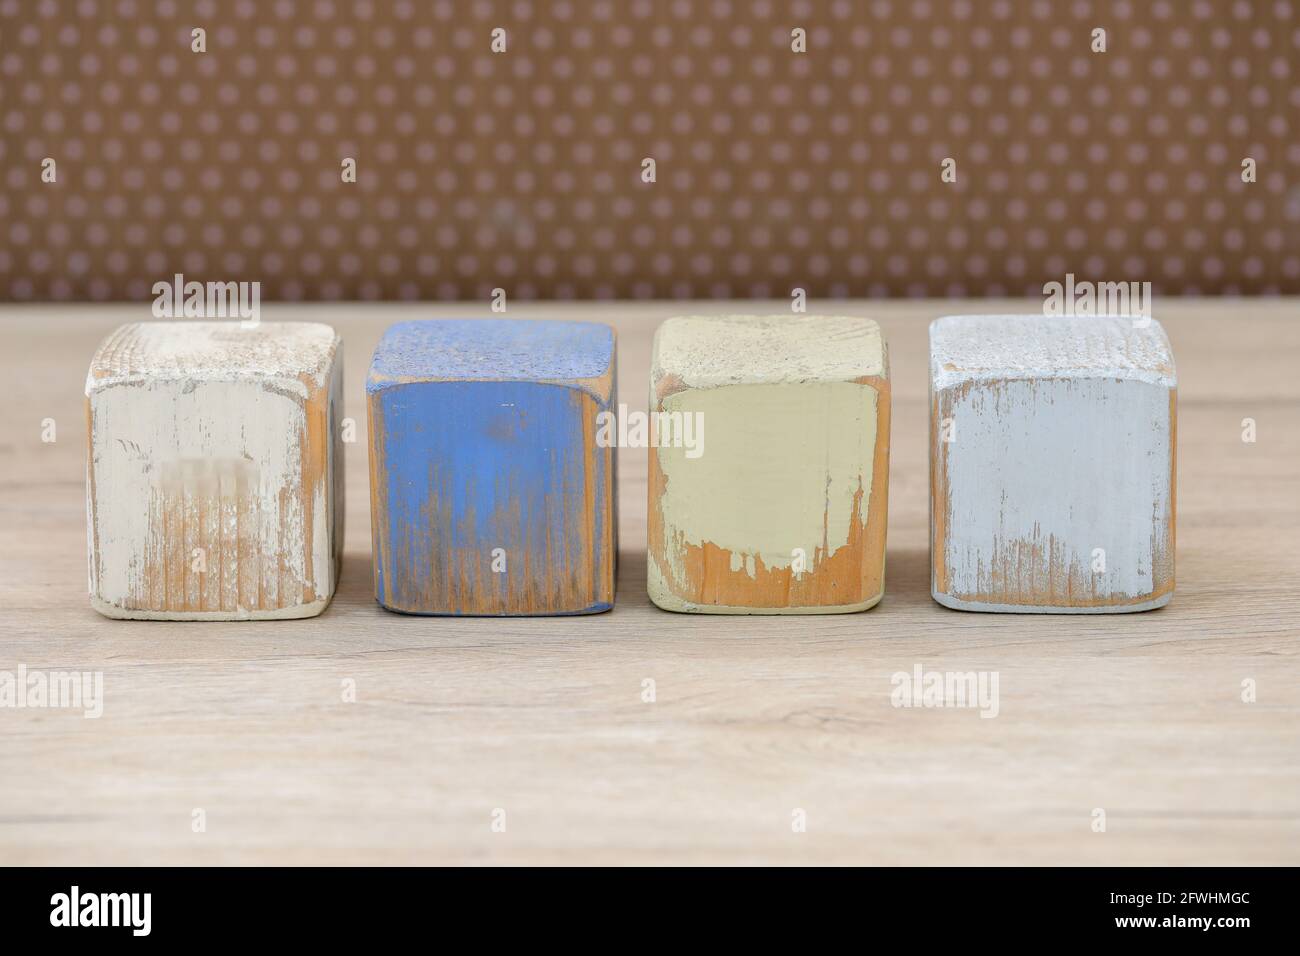 Wooden blocks on a wooden surface and a brown background. Stock Photo